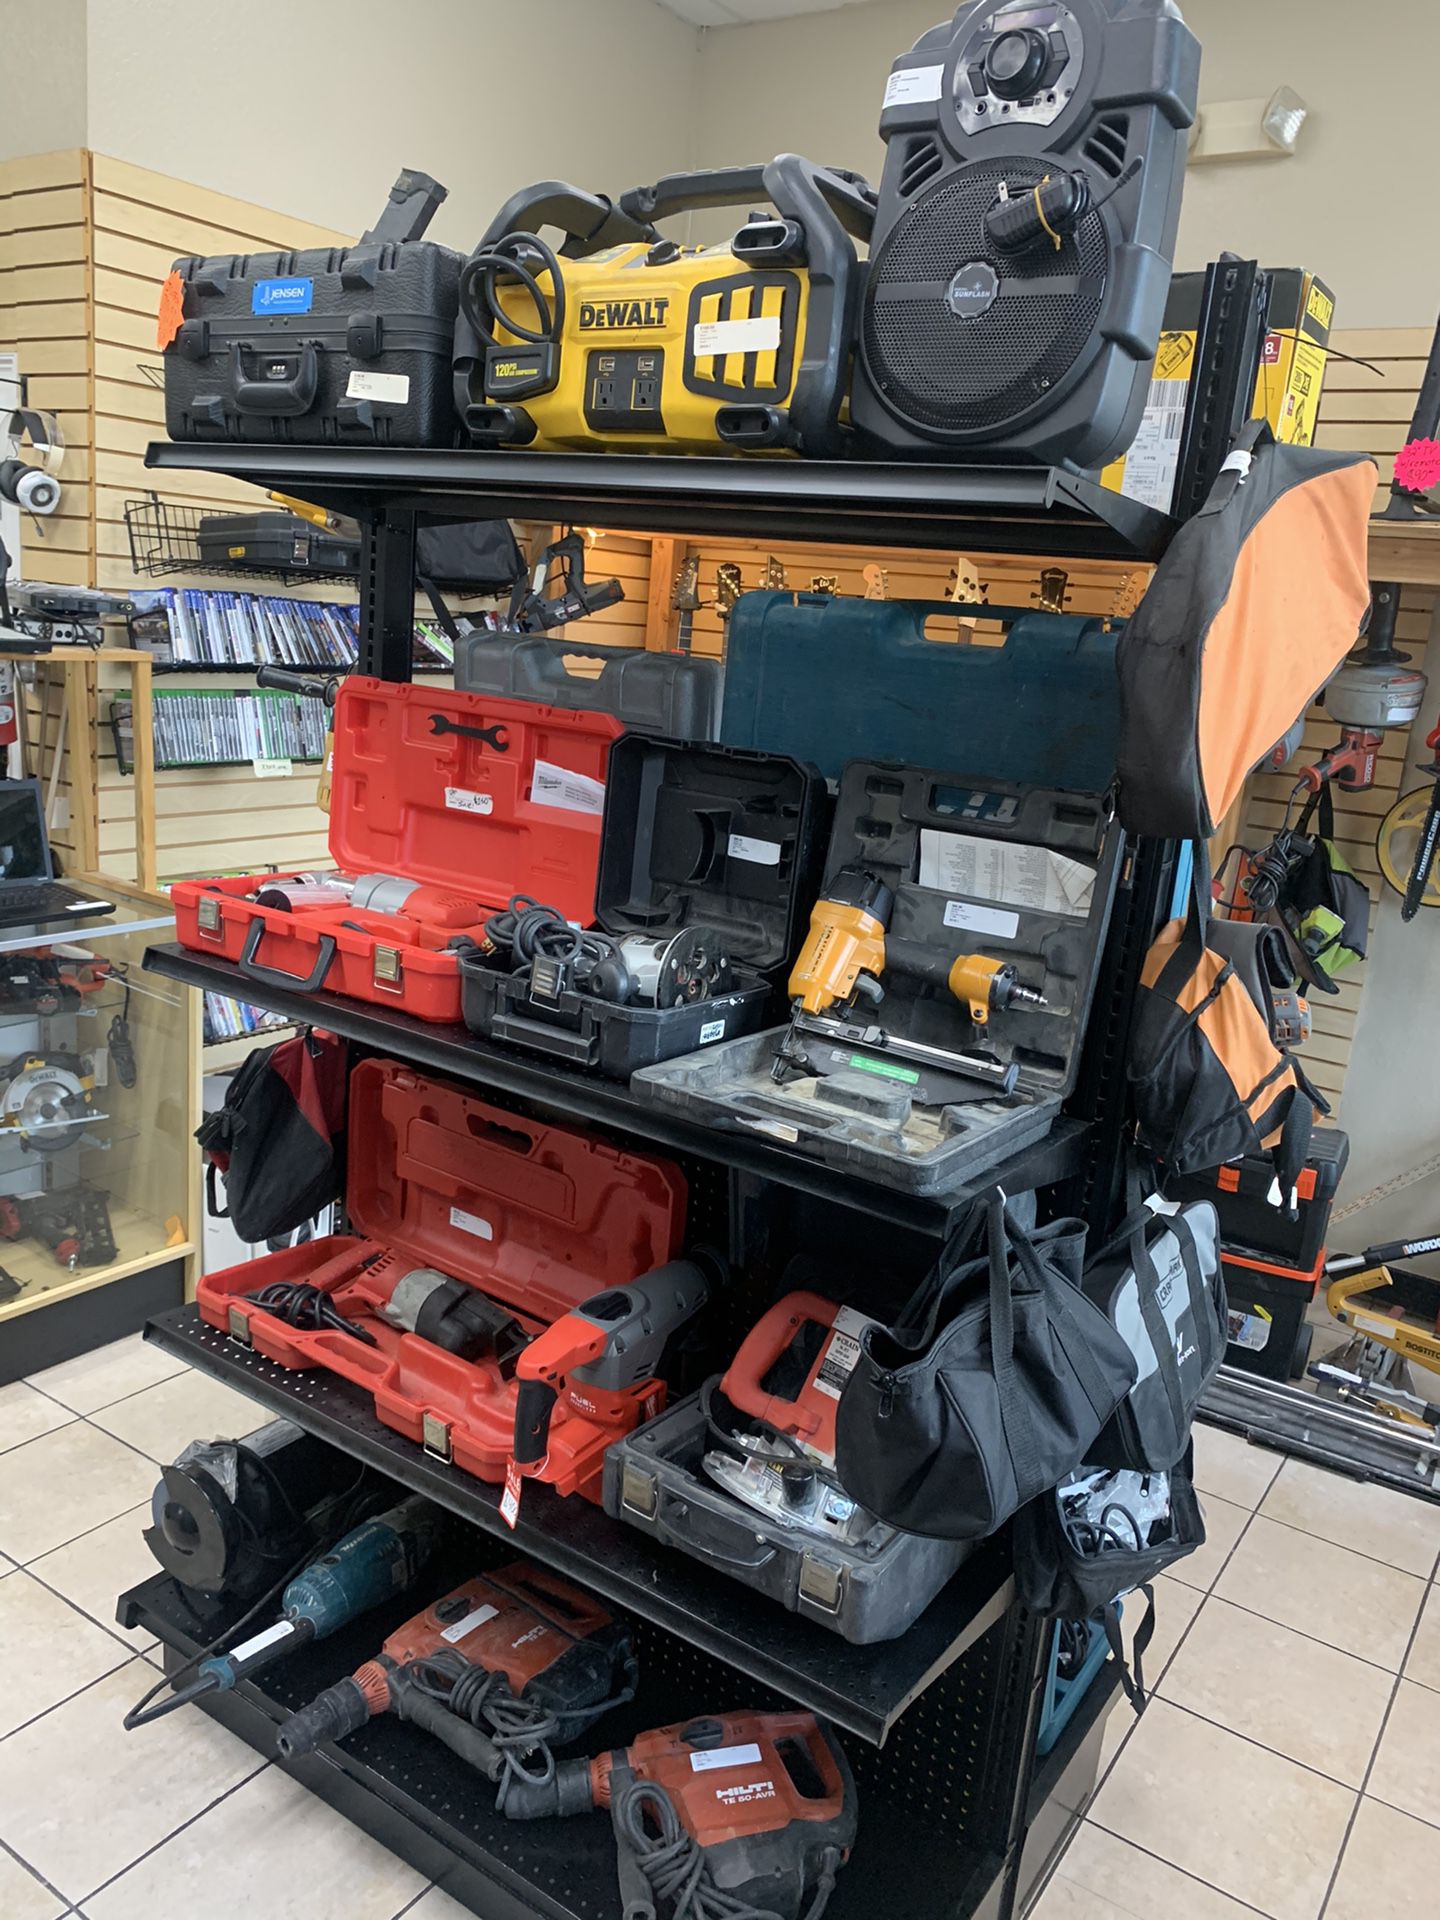 TOOLS FOR SALE! BEST PRICES IN TOWN! POWER & ASSORTED TOOLS, LAWN EQUIPMENT, AIR TOOLS, ETC.